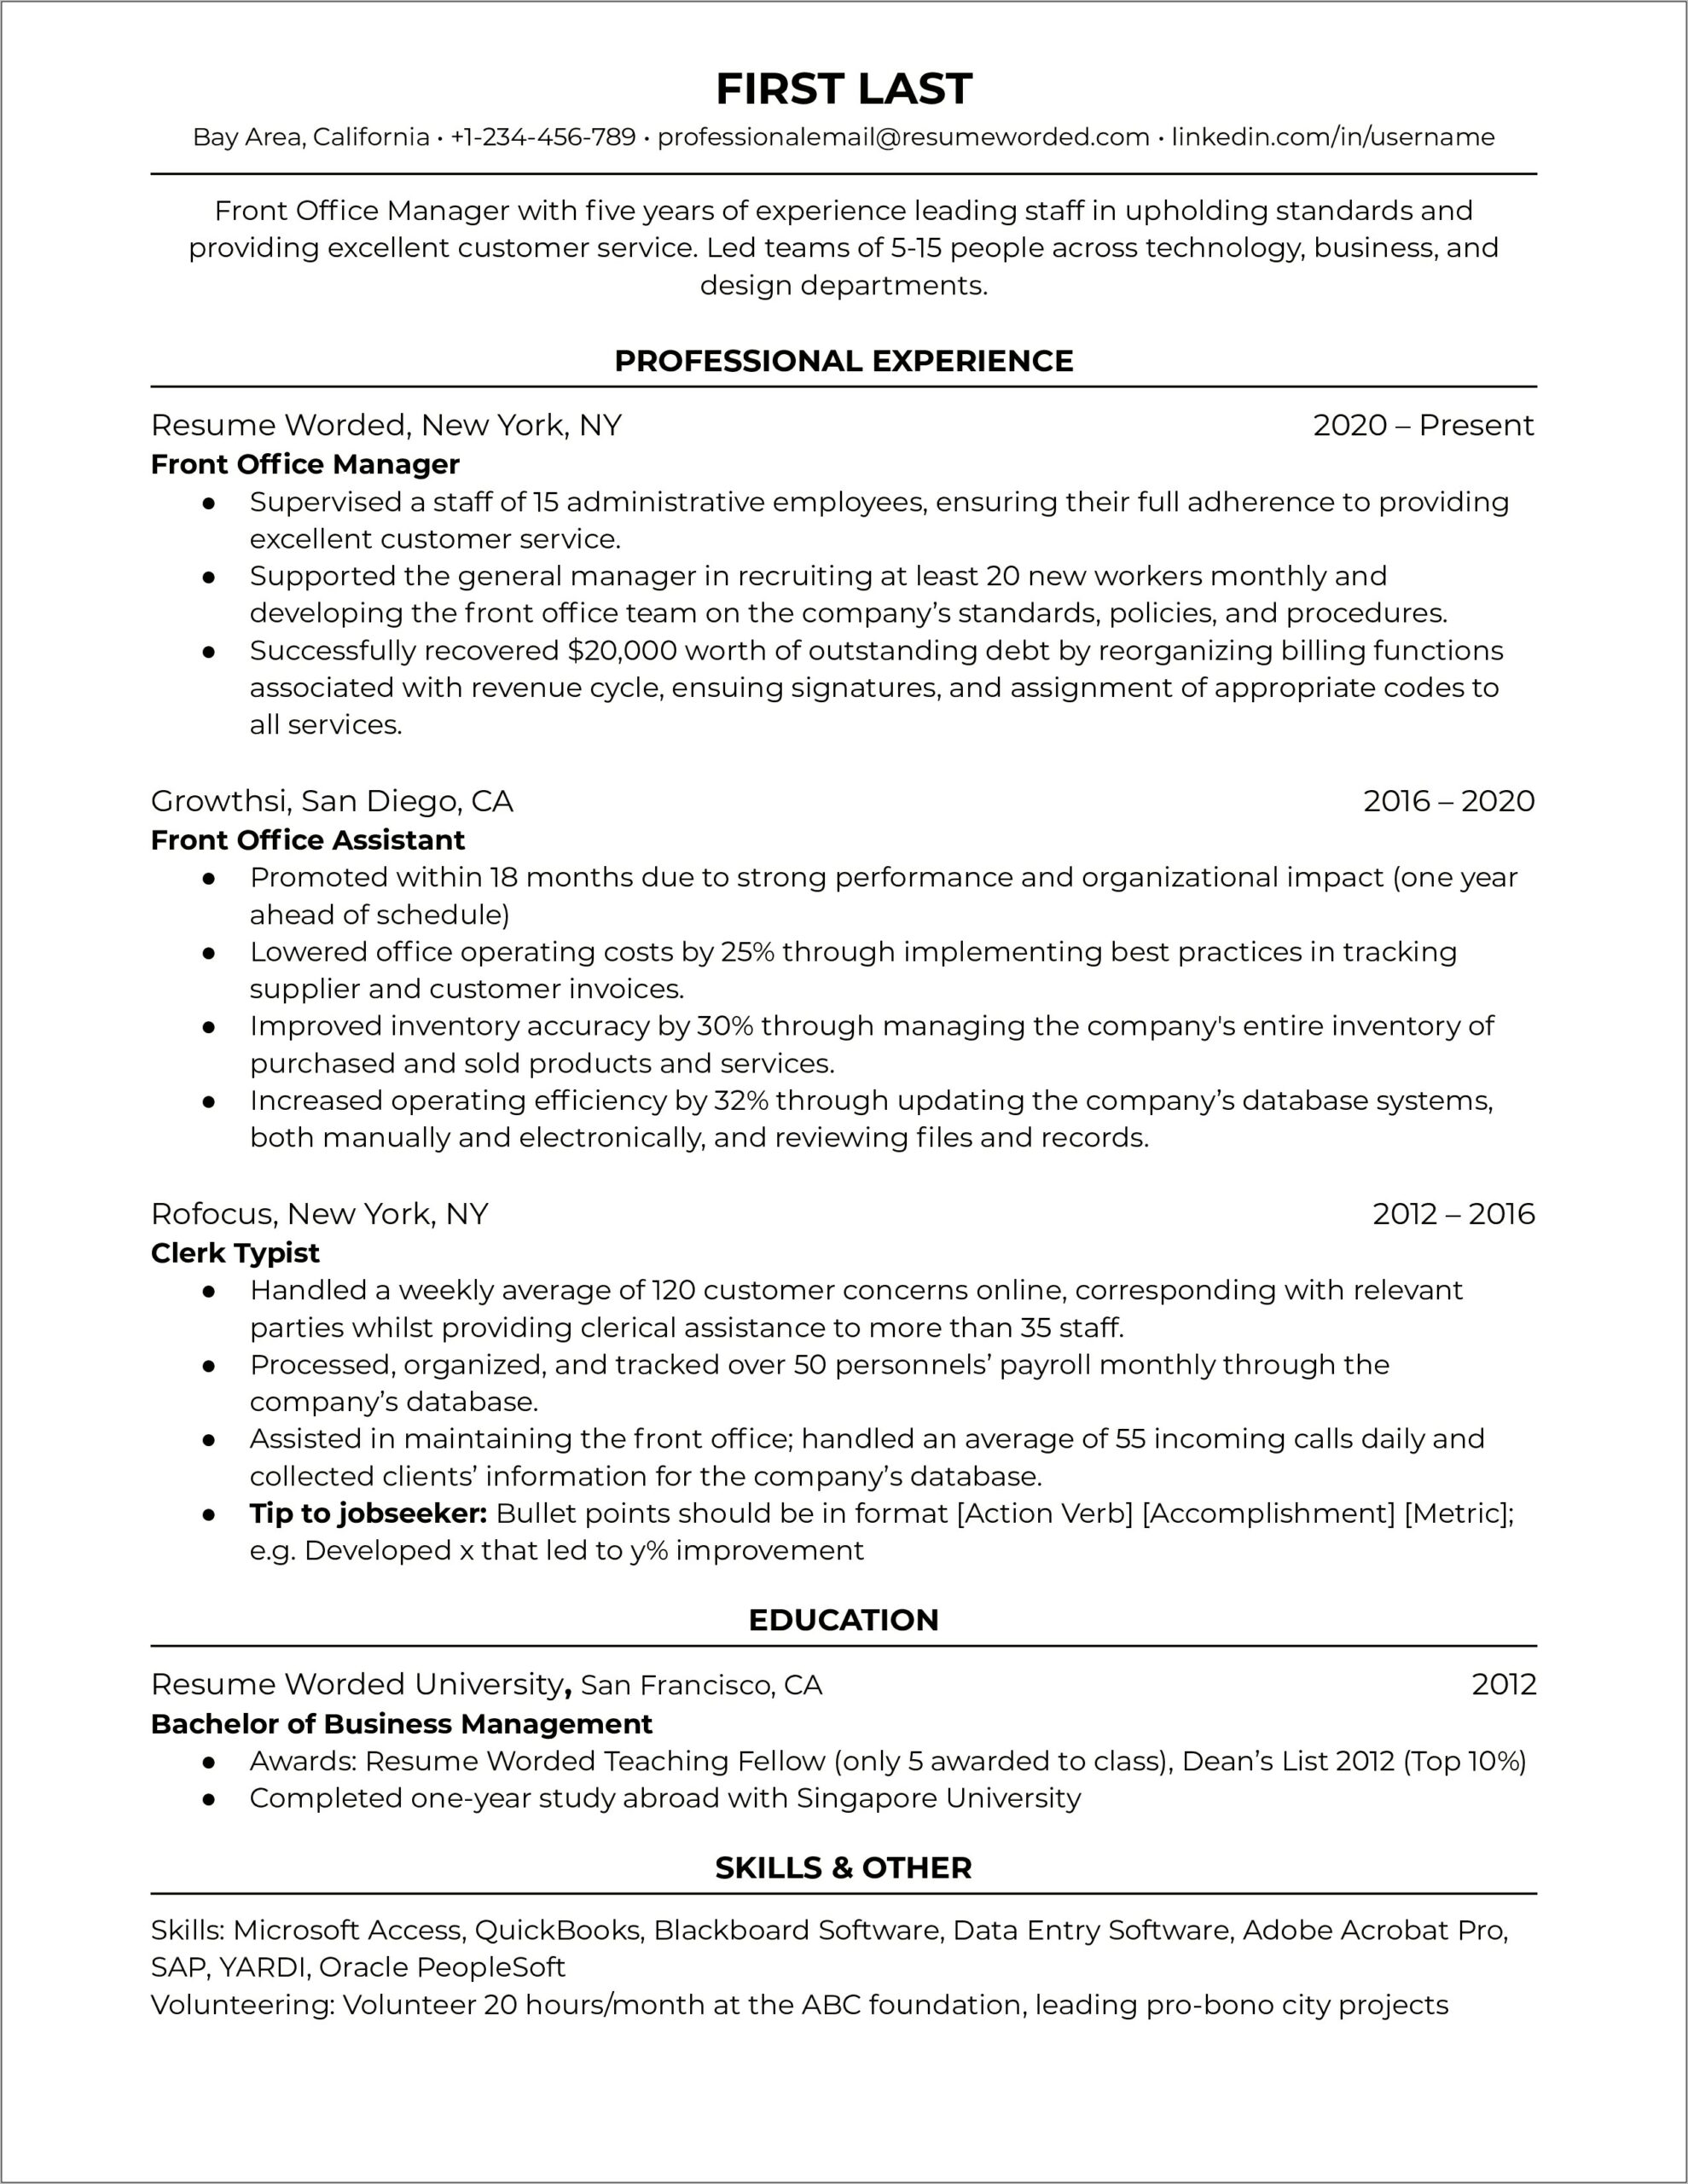 Good Office Manager Skills For Resume